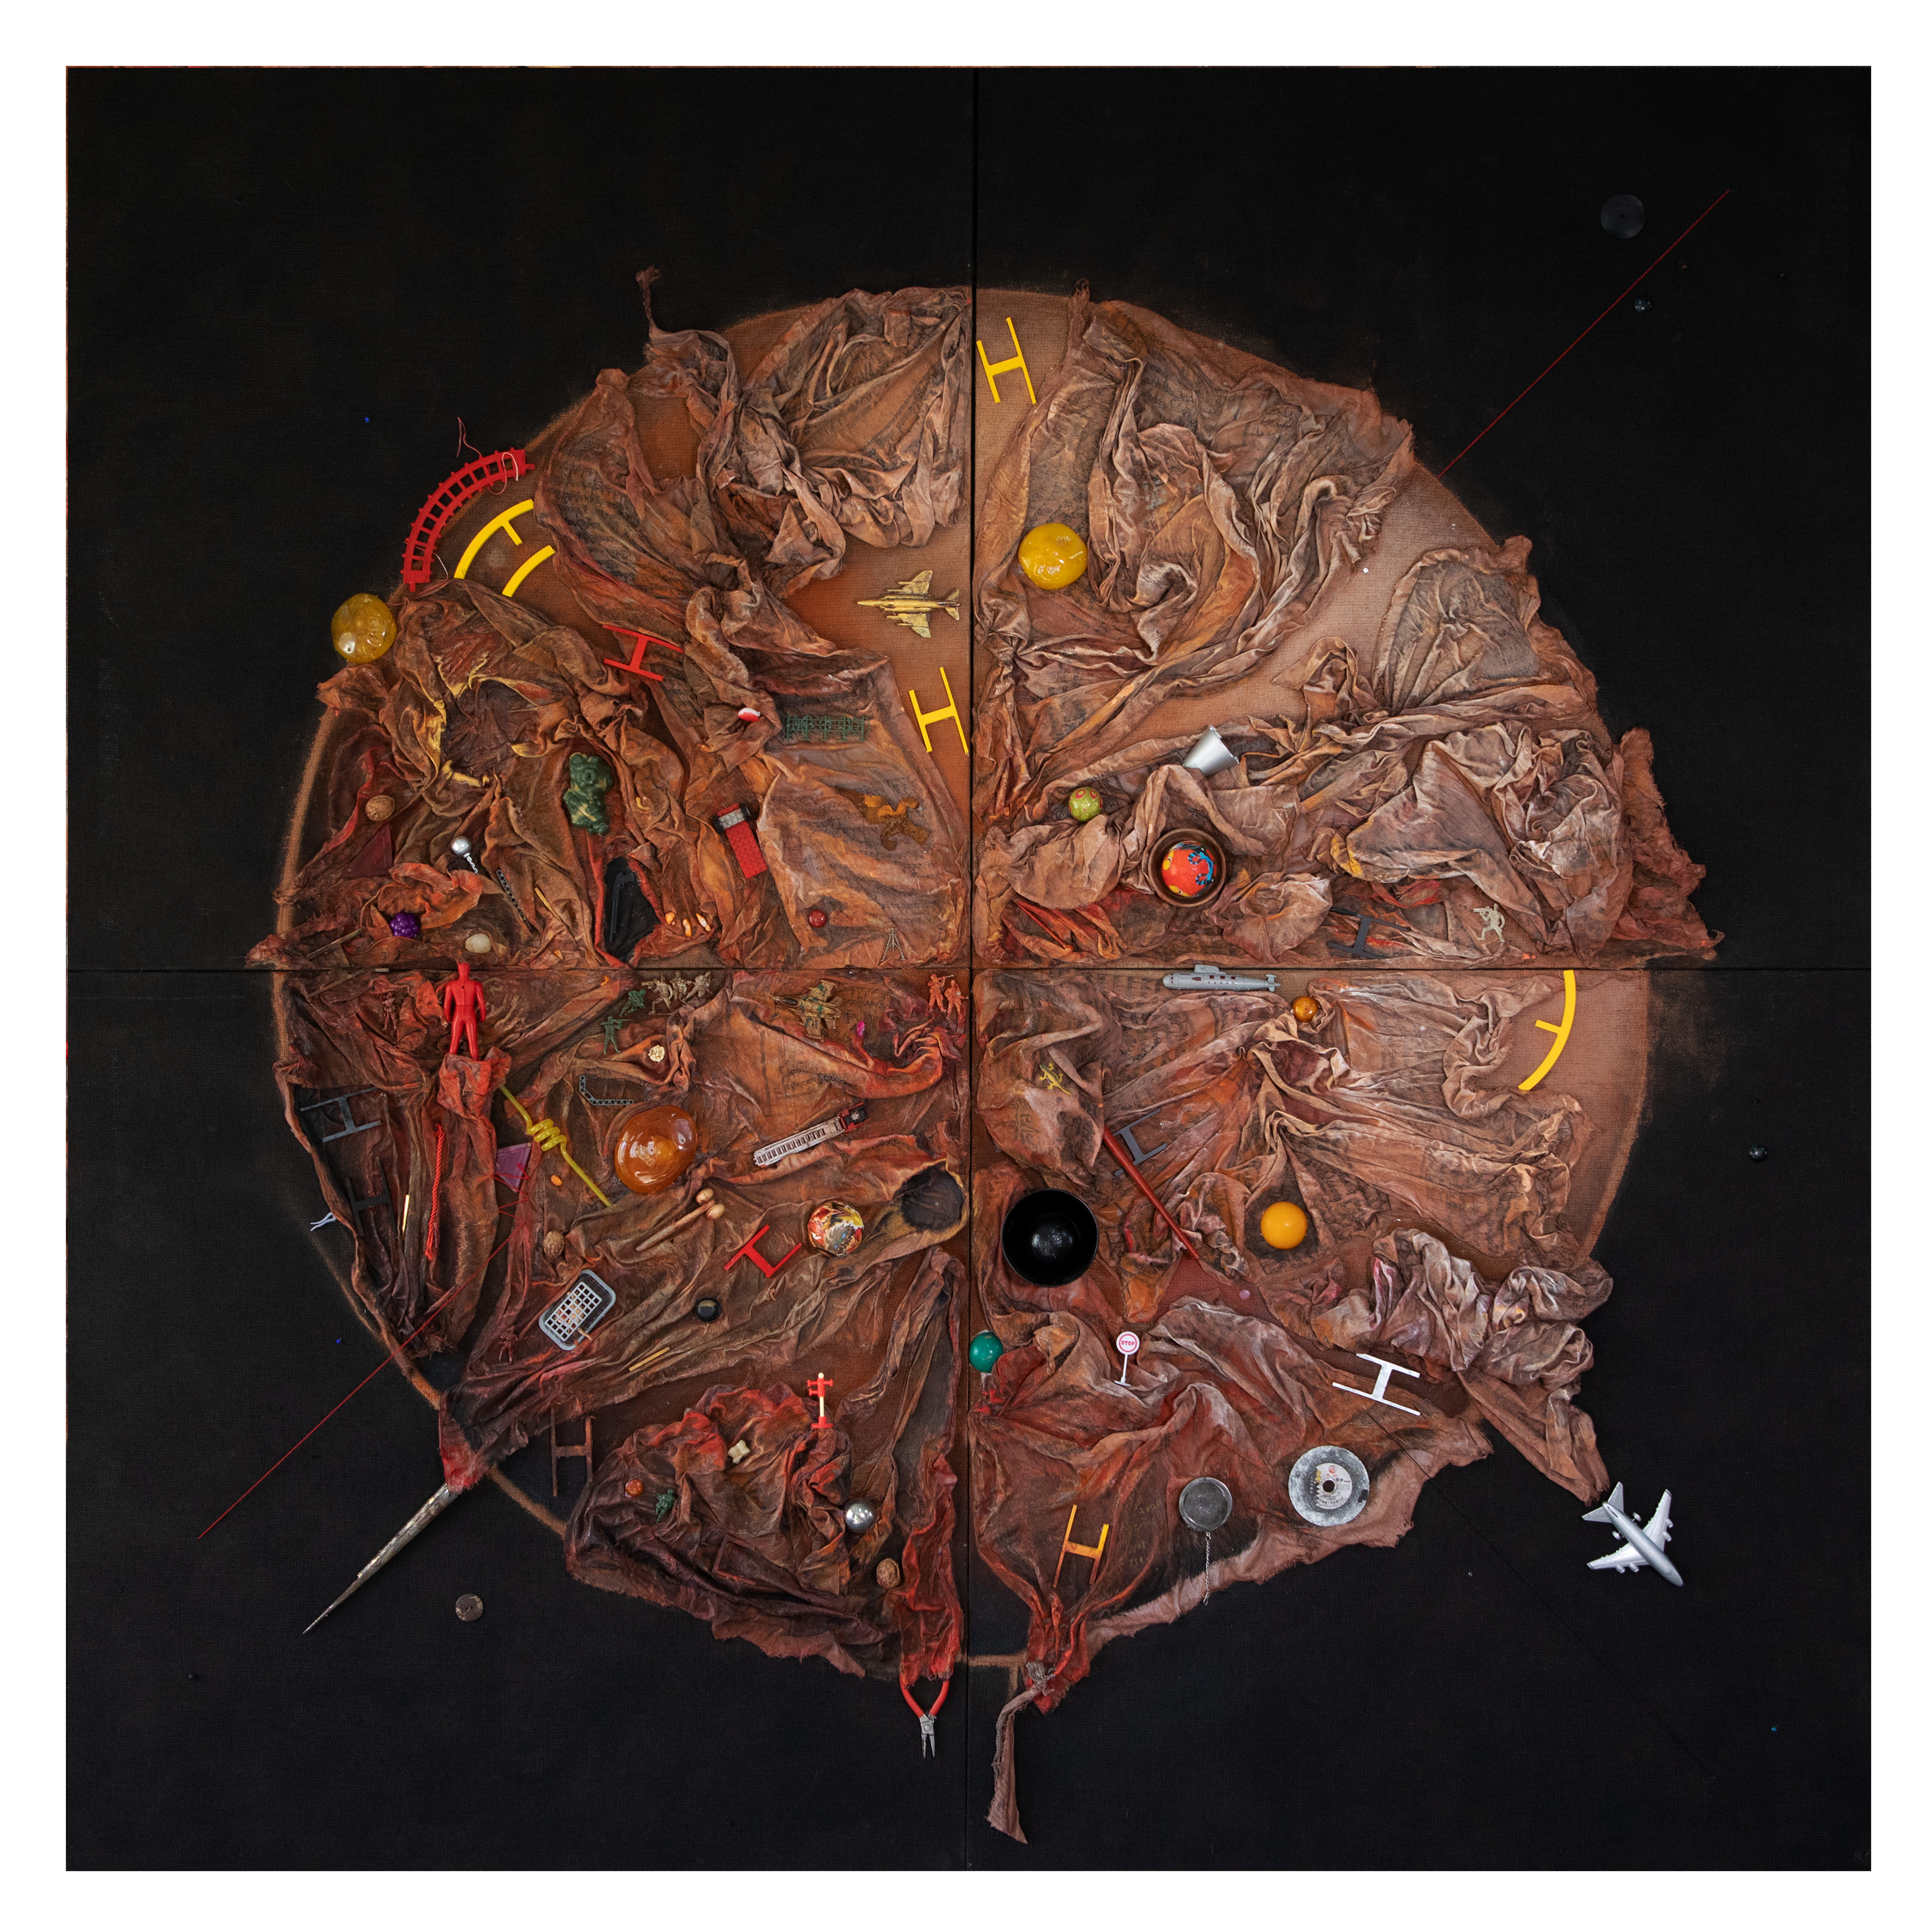 Circular multimedia piece in brown, embedded with small objects, divided into quarters